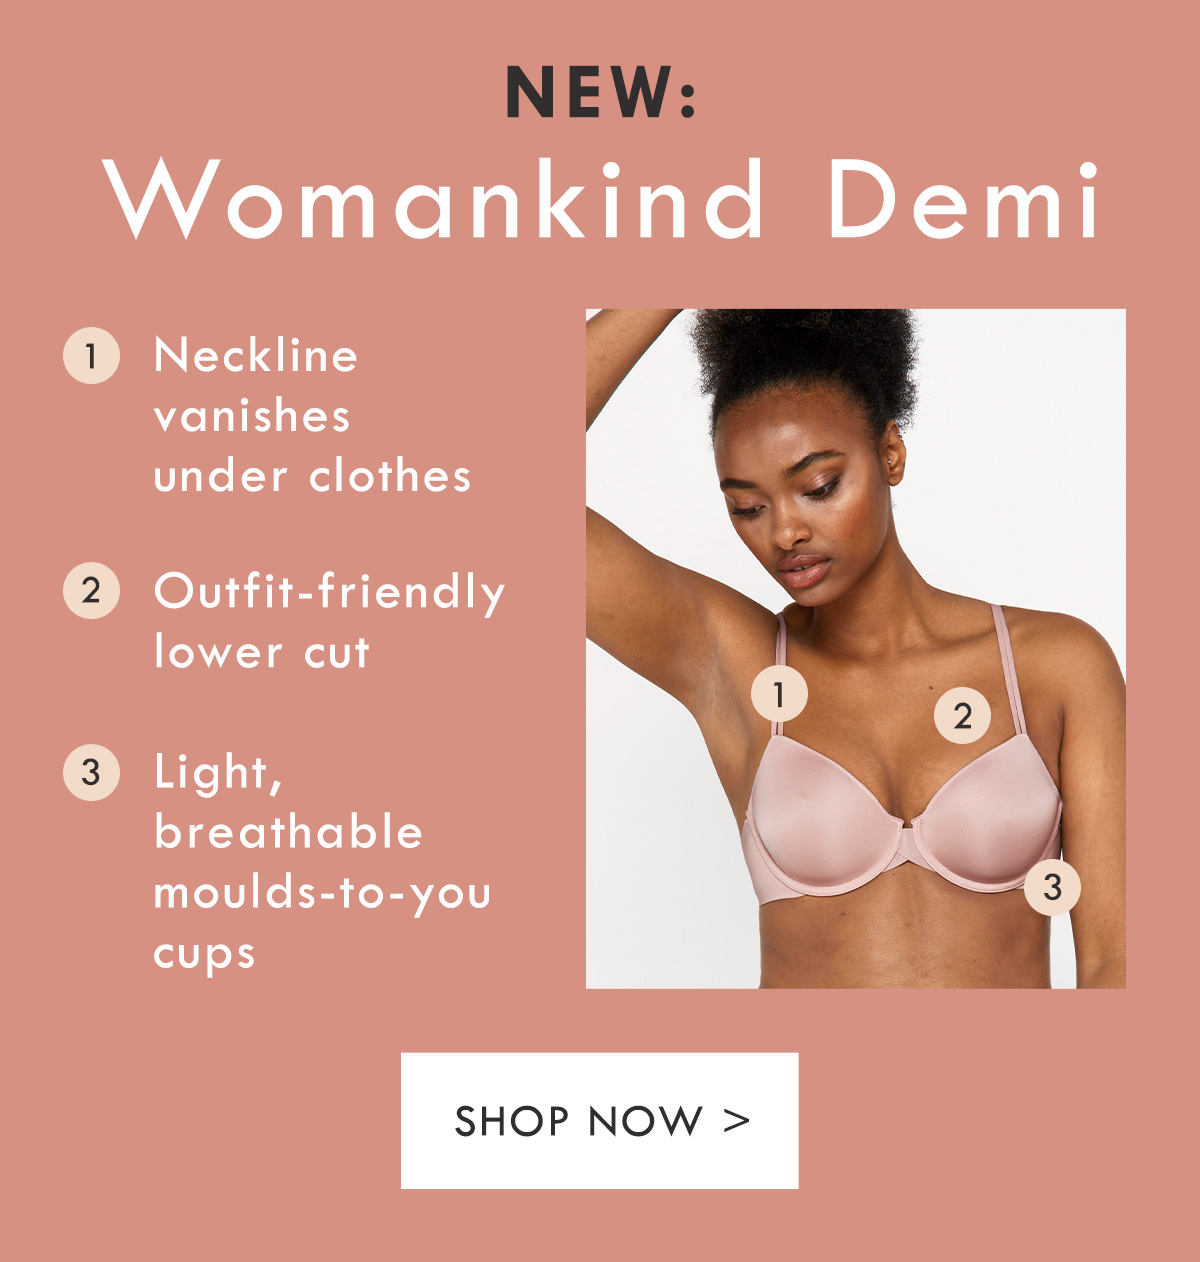 New: Womankind Demi. Neckline vanishes under clothes. Outfit-friendly lower cut. Light, breathable moulds-to-you cups. Shop Now.